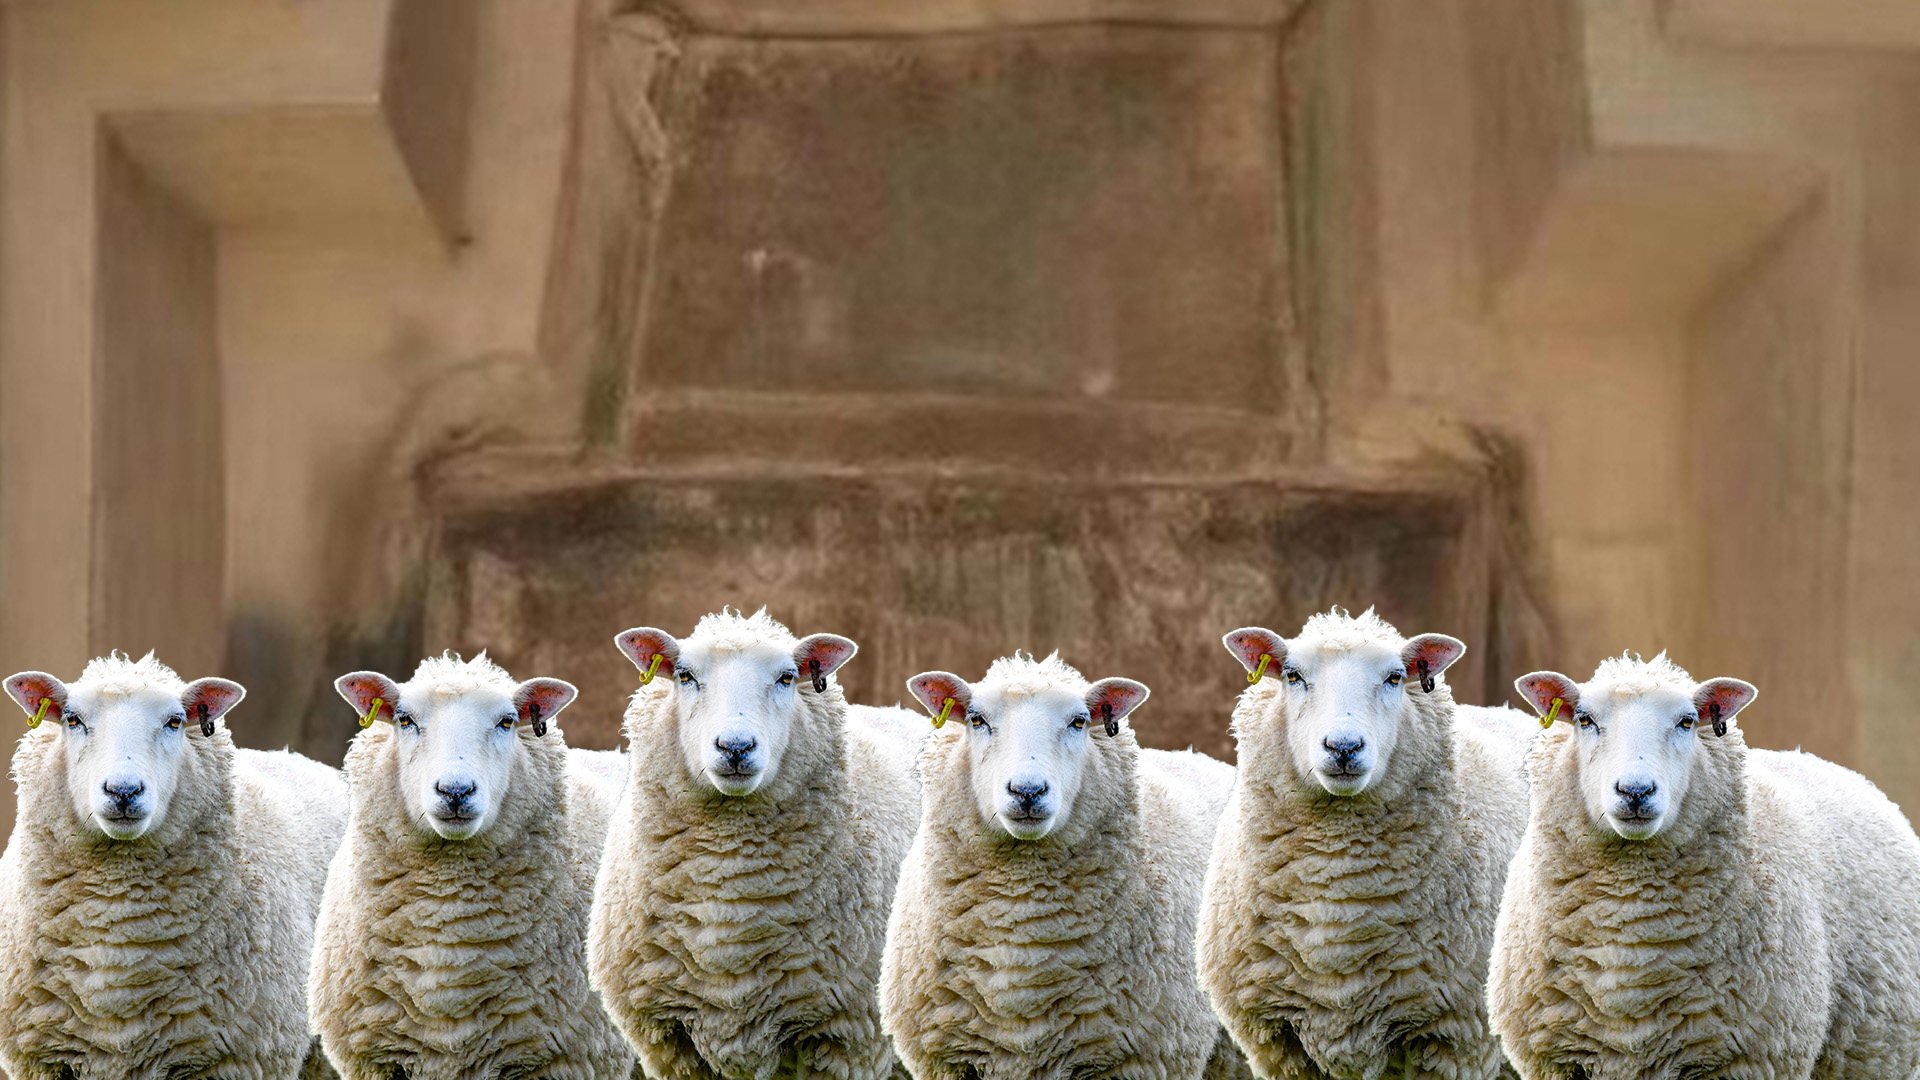 A rare “six-sheep” carriage, discovered near the mausoleum of China’s first Emperor in Qin dynasty in Xian provides fresh insights into early burial practices during that era. Photo: SCMP composite/Shutterstock/CCTV